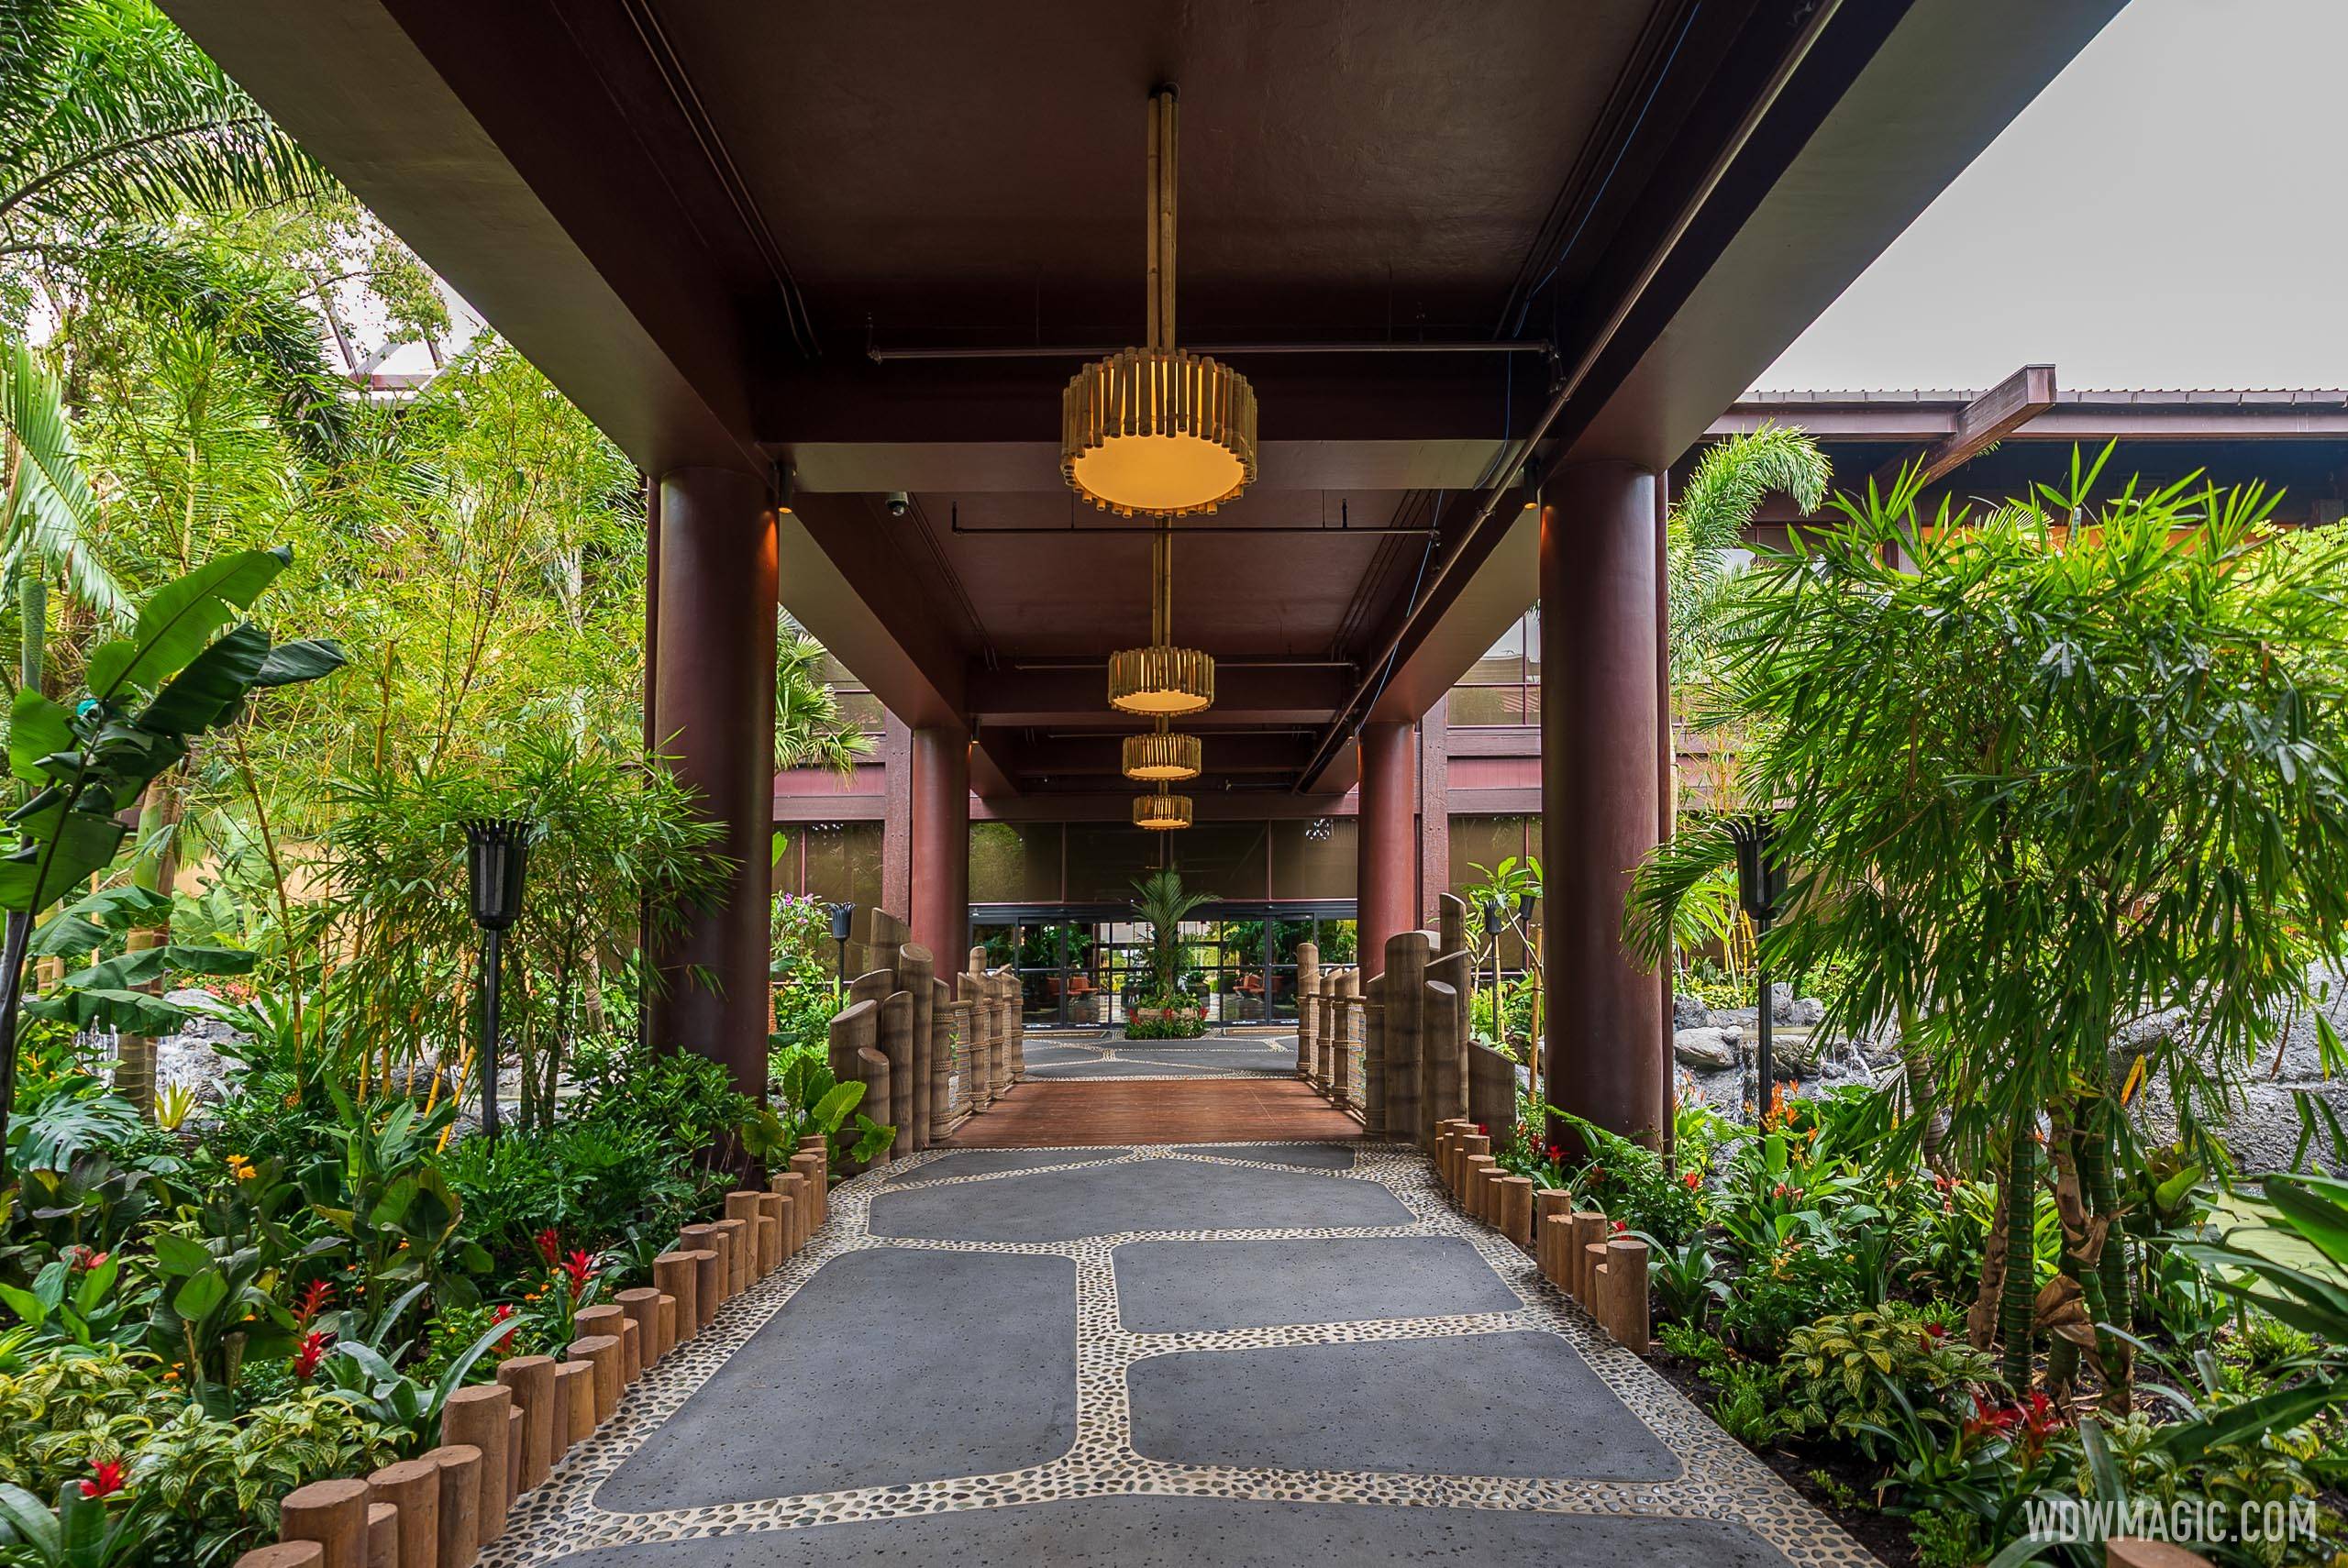 A look at the recently reopened main entrance at Disney's Polynesian Village Resort